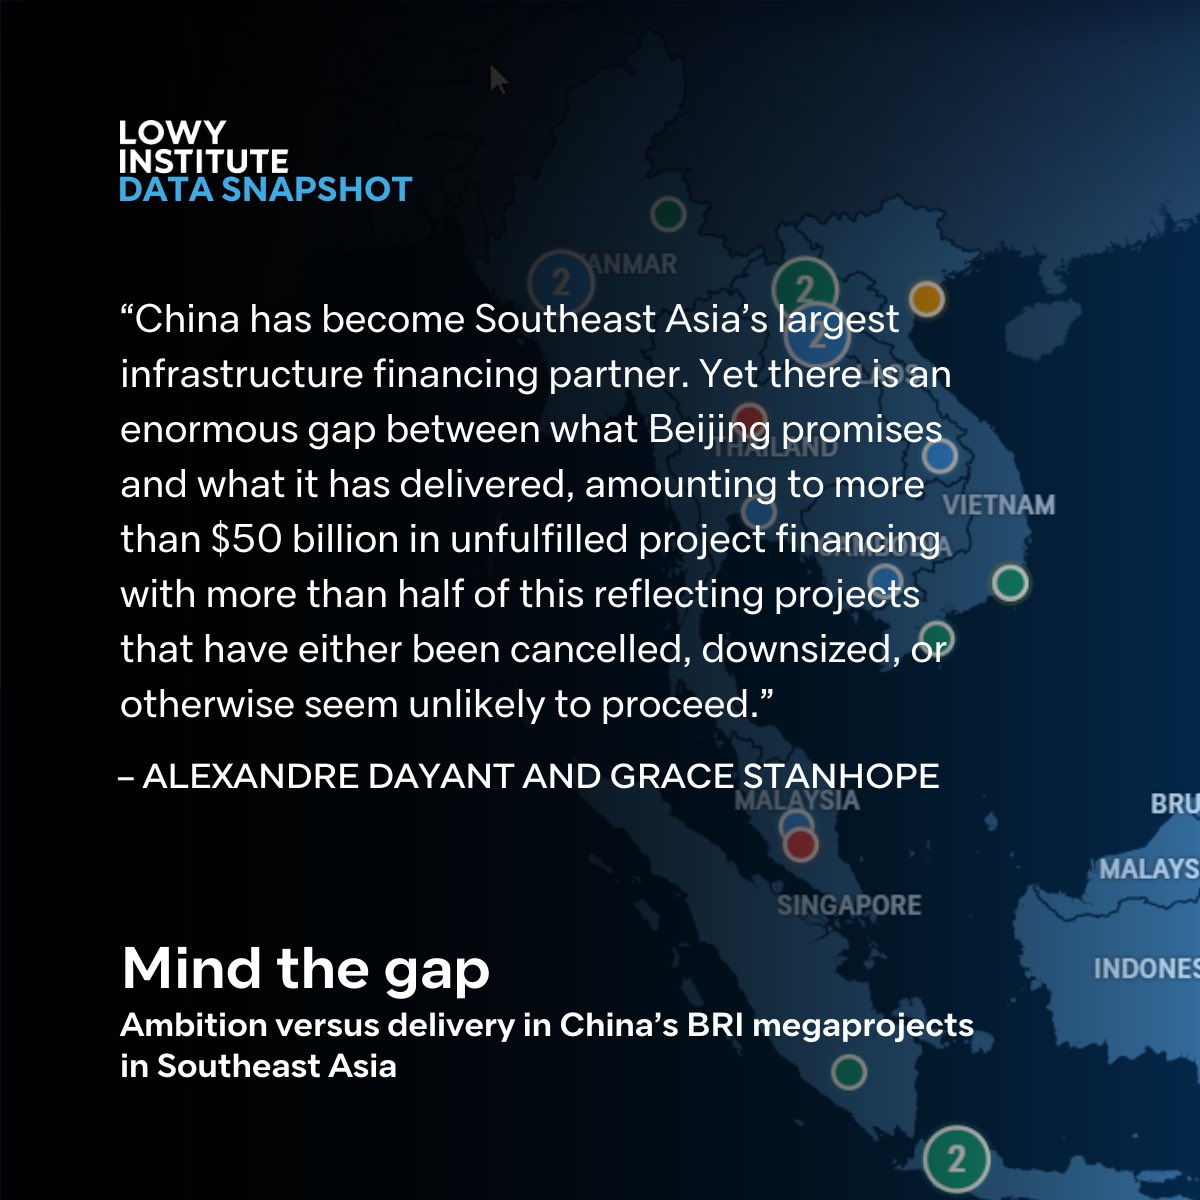 The @LowyInstitute’s @AlexandreDayant & @GraceStanhope have mapped China’s infrastructure funding promises to Southeast Asian countries vs what has actually been built. They have revealed a sizeable gap between what Beijing promises and what it delivers. interactives.lowyinstitute.org/features/mind-…